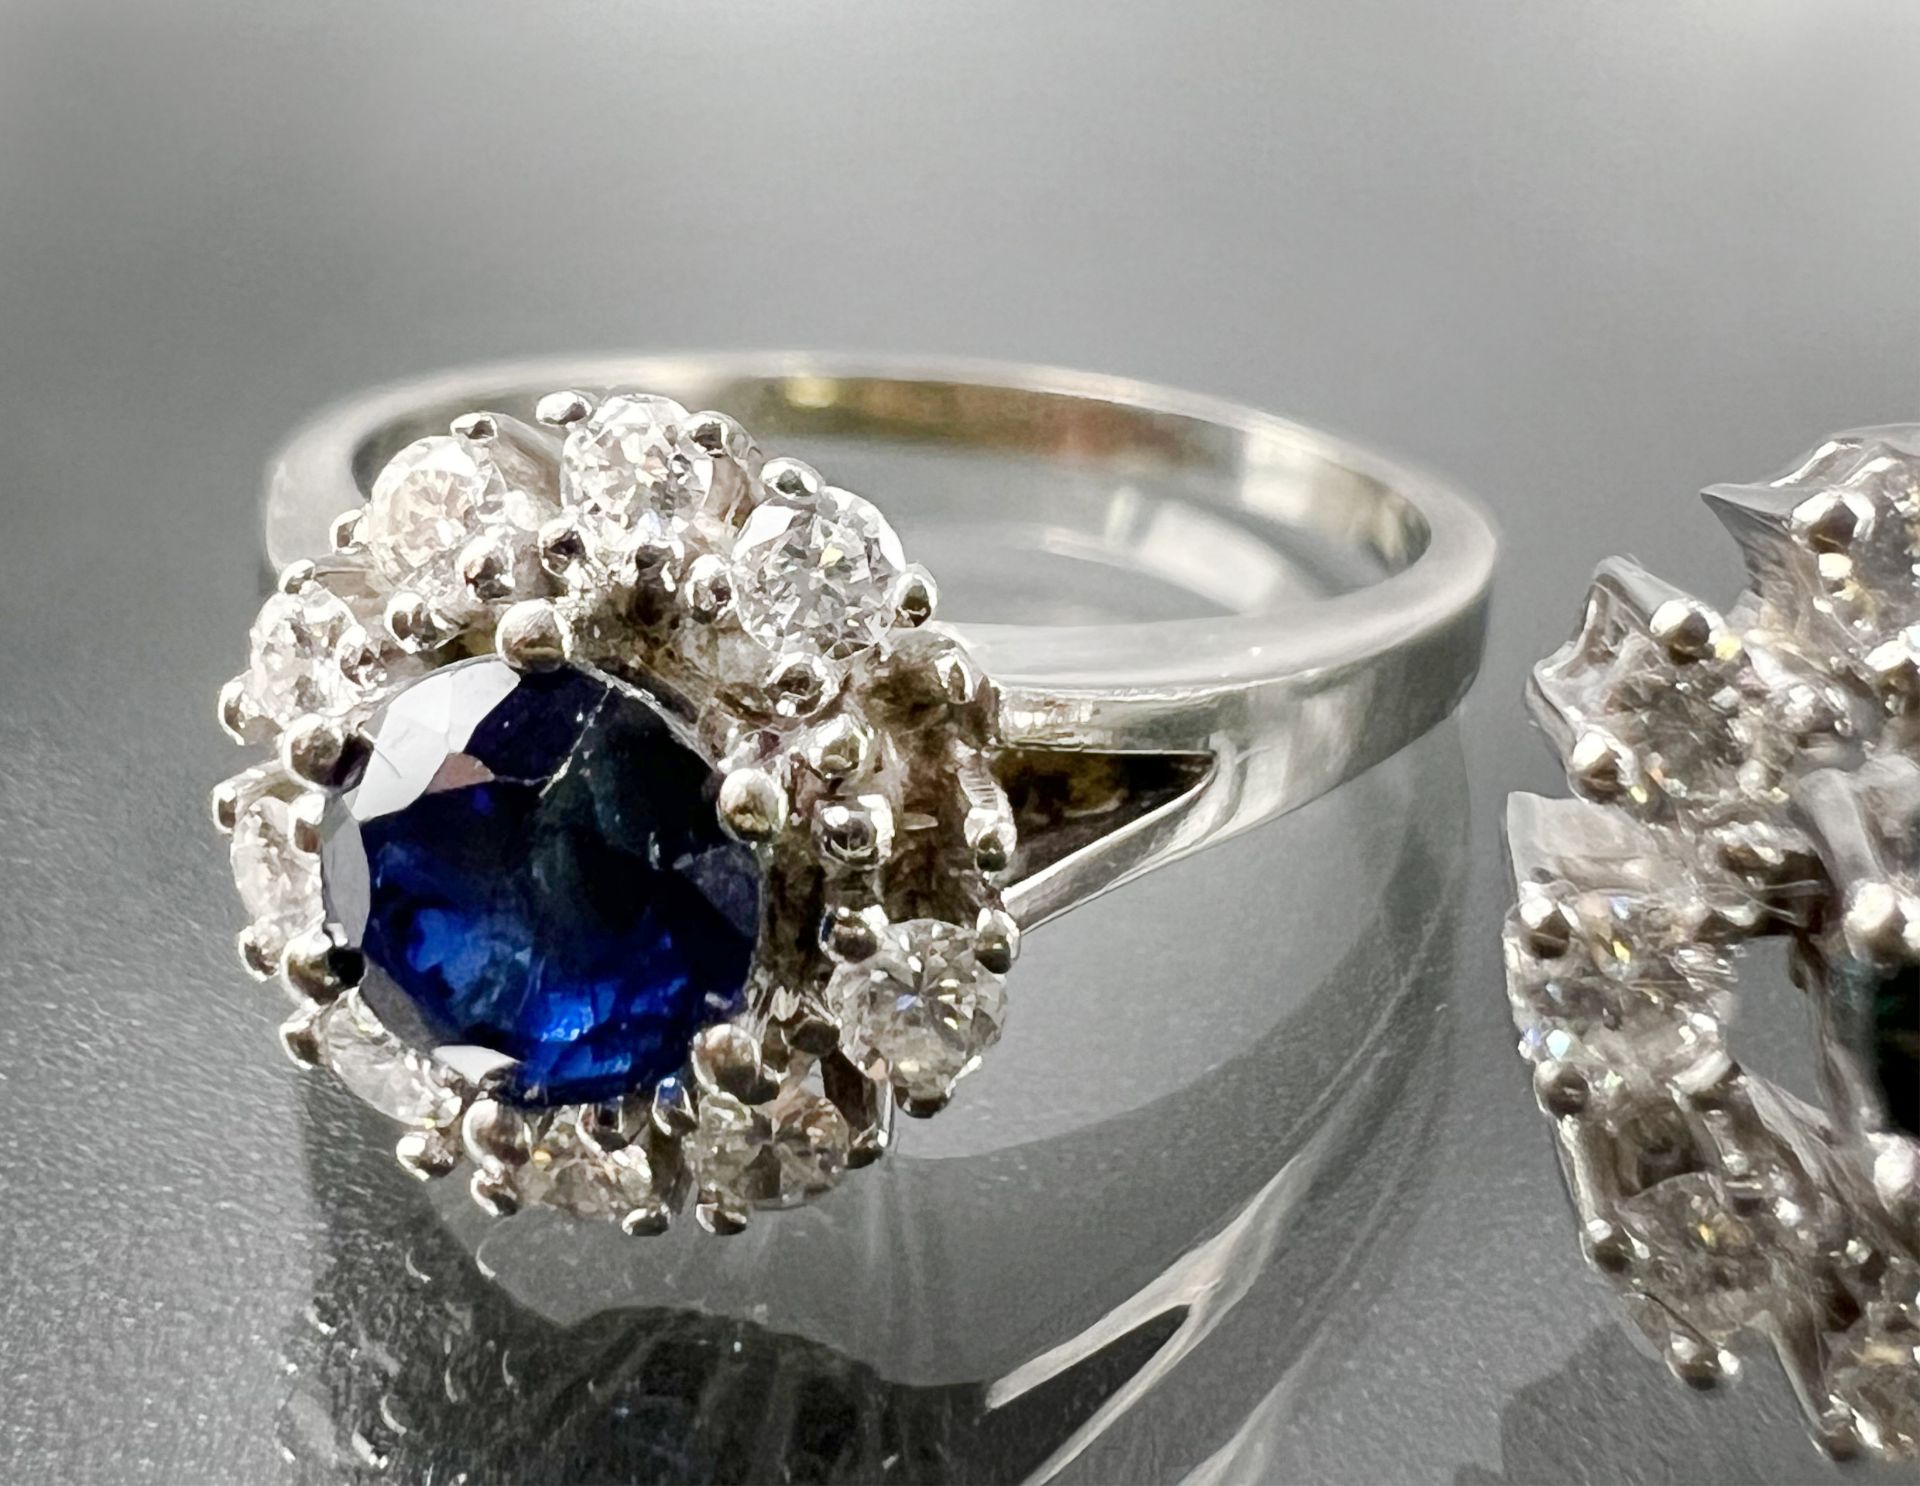 Jewellery set 585 white gold. Necklace and ring with sapphires and diamonds. - Image 3 of 12